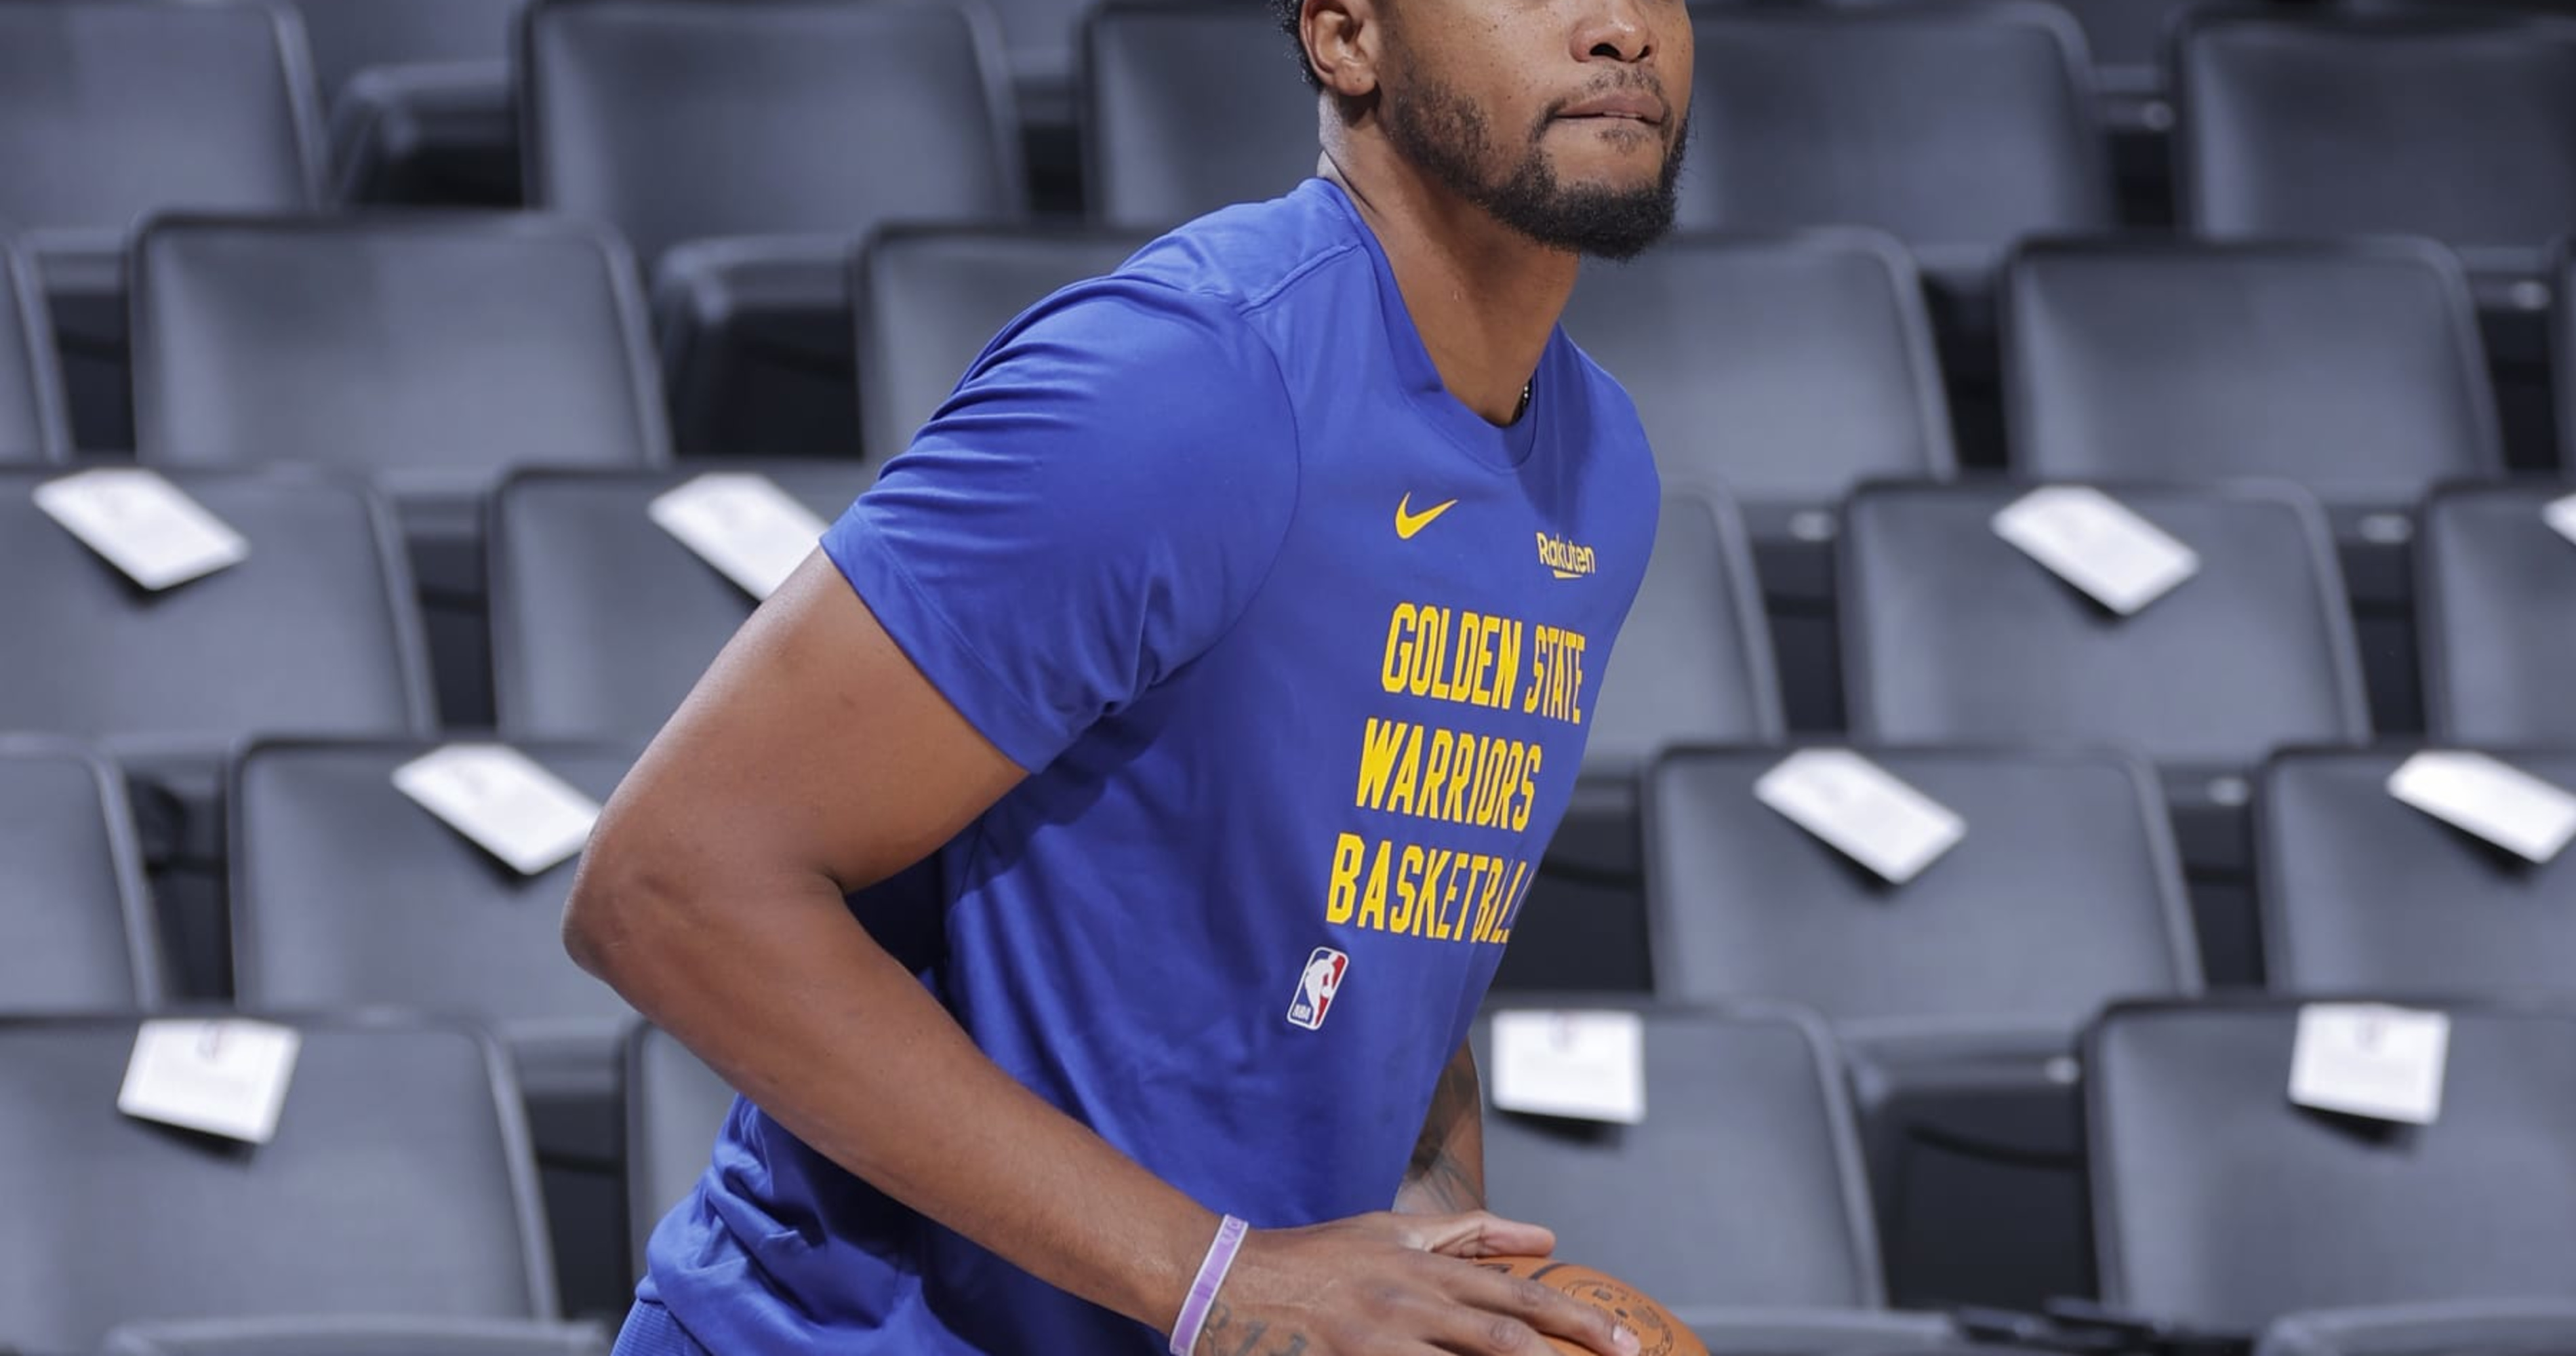 Warriors jersey advertisement: GSW signs $60 million deal with